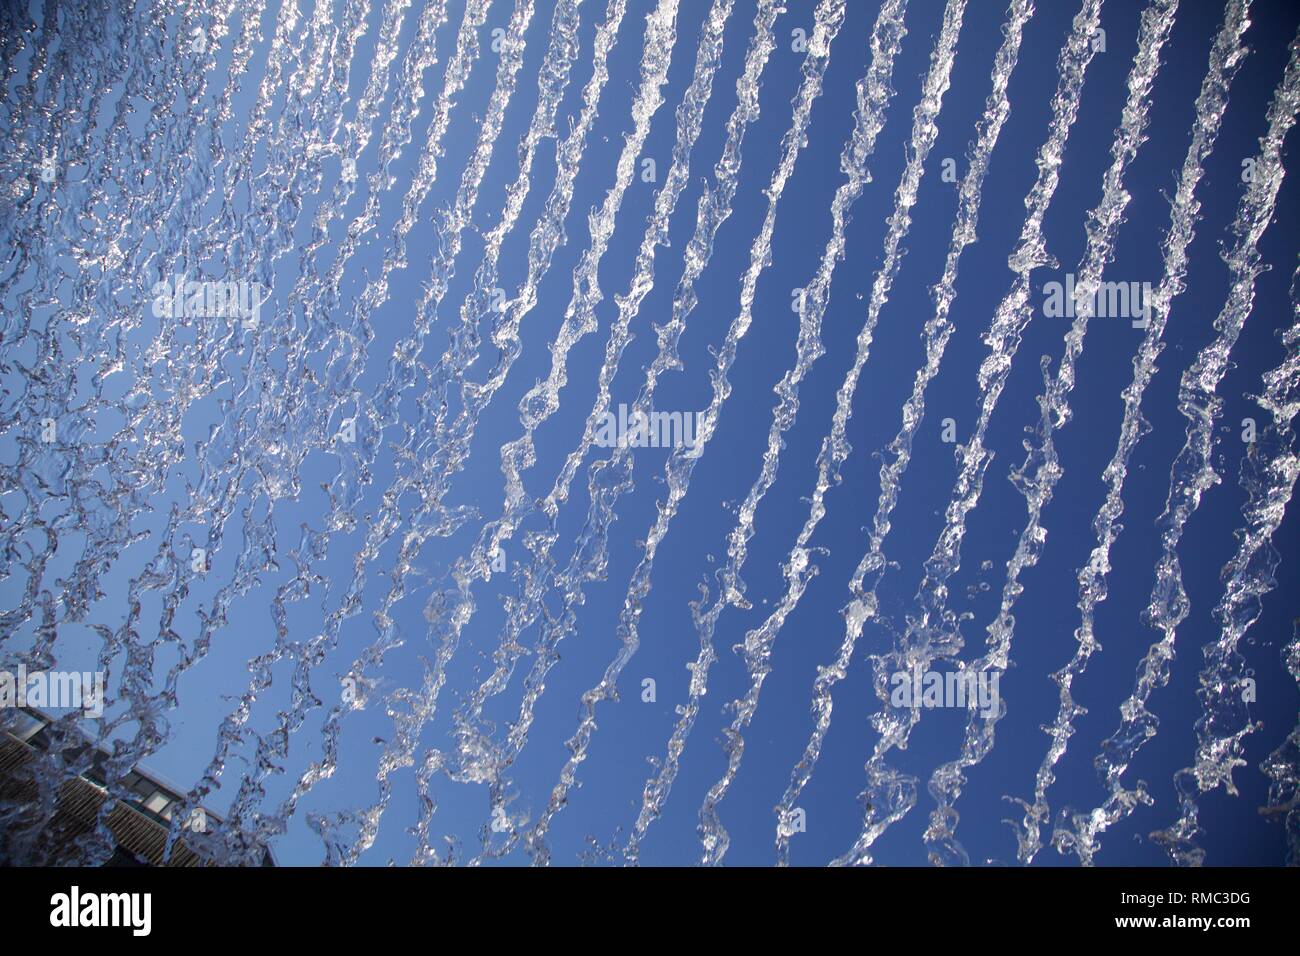 jets of water forming lines on the sky Stock Photo